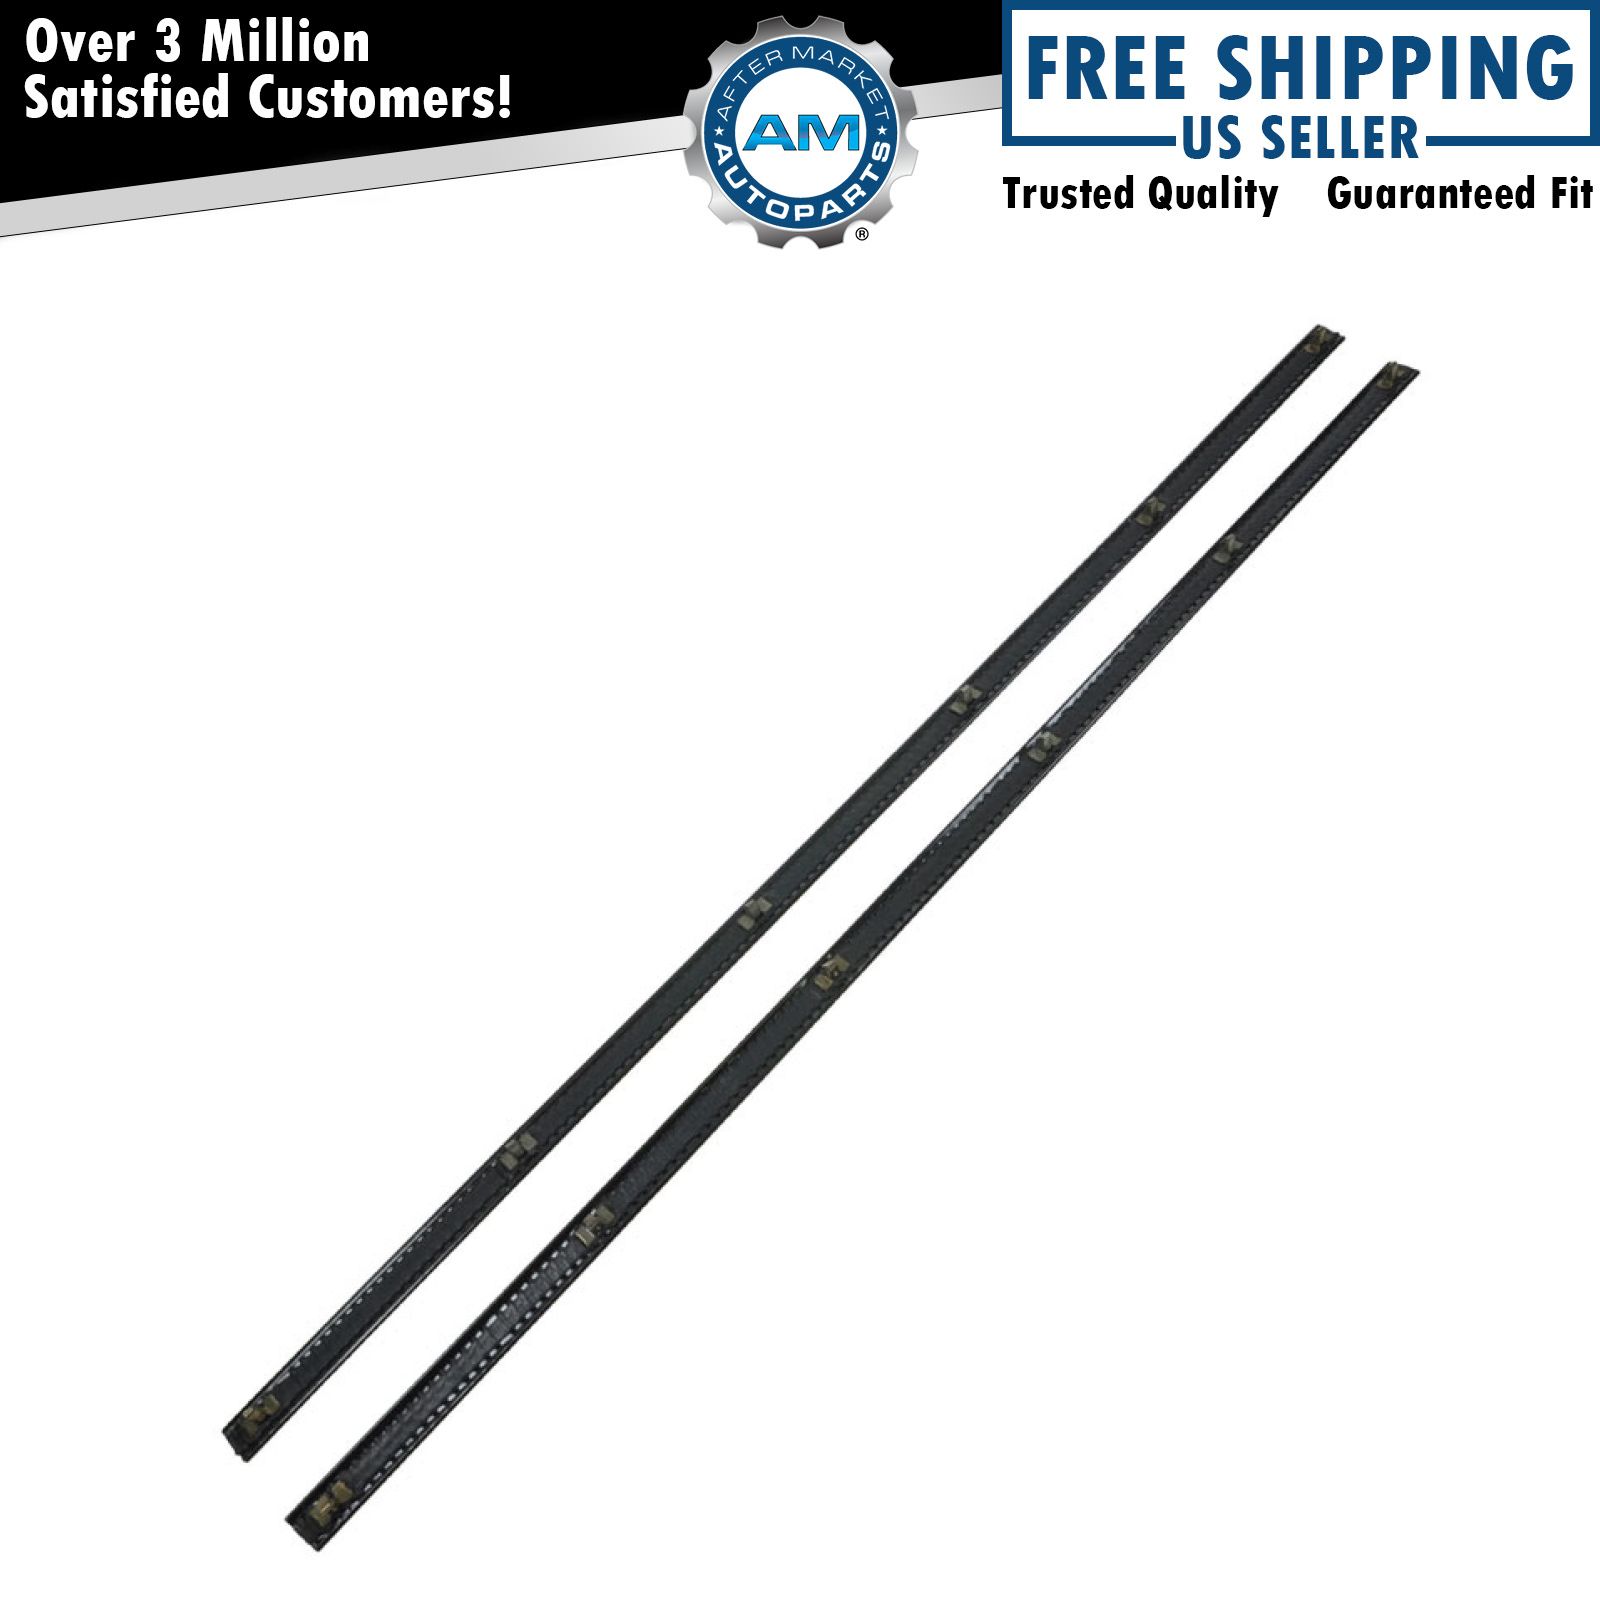 Inner or Outer Window Sweep 2 Piece Set Kit for 71-80 International Scout II